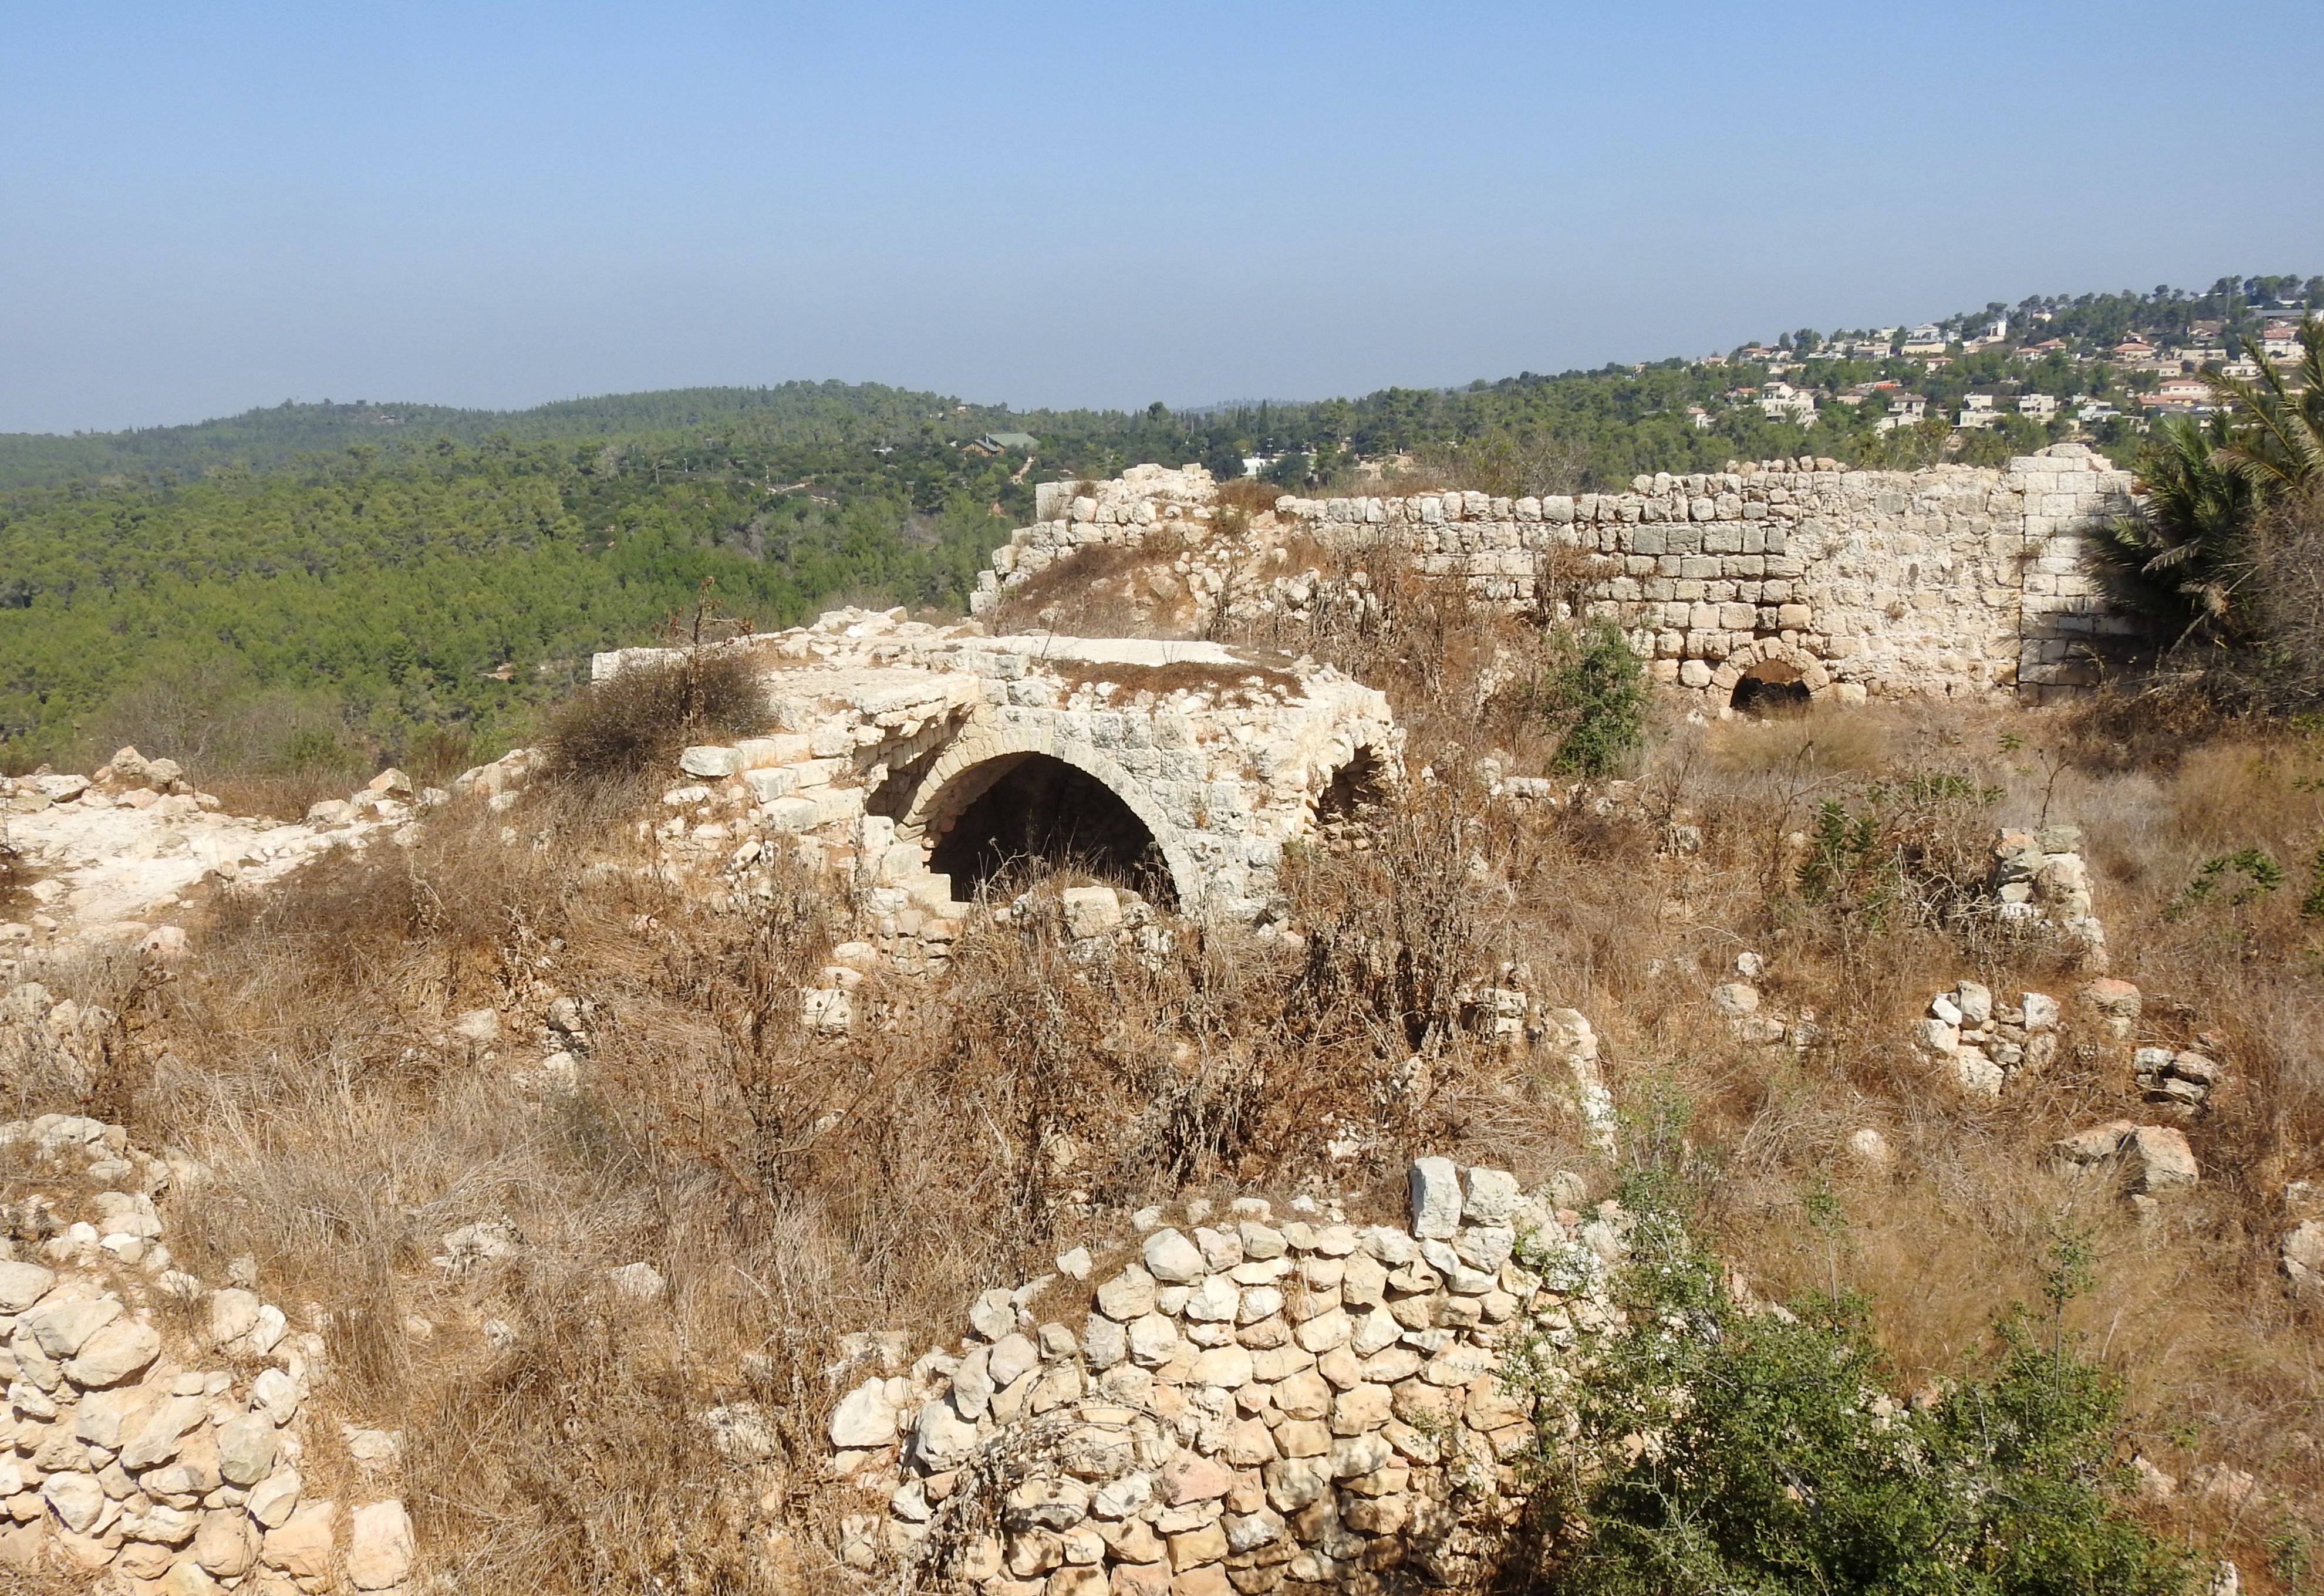 The ruins of Beit 'Itab